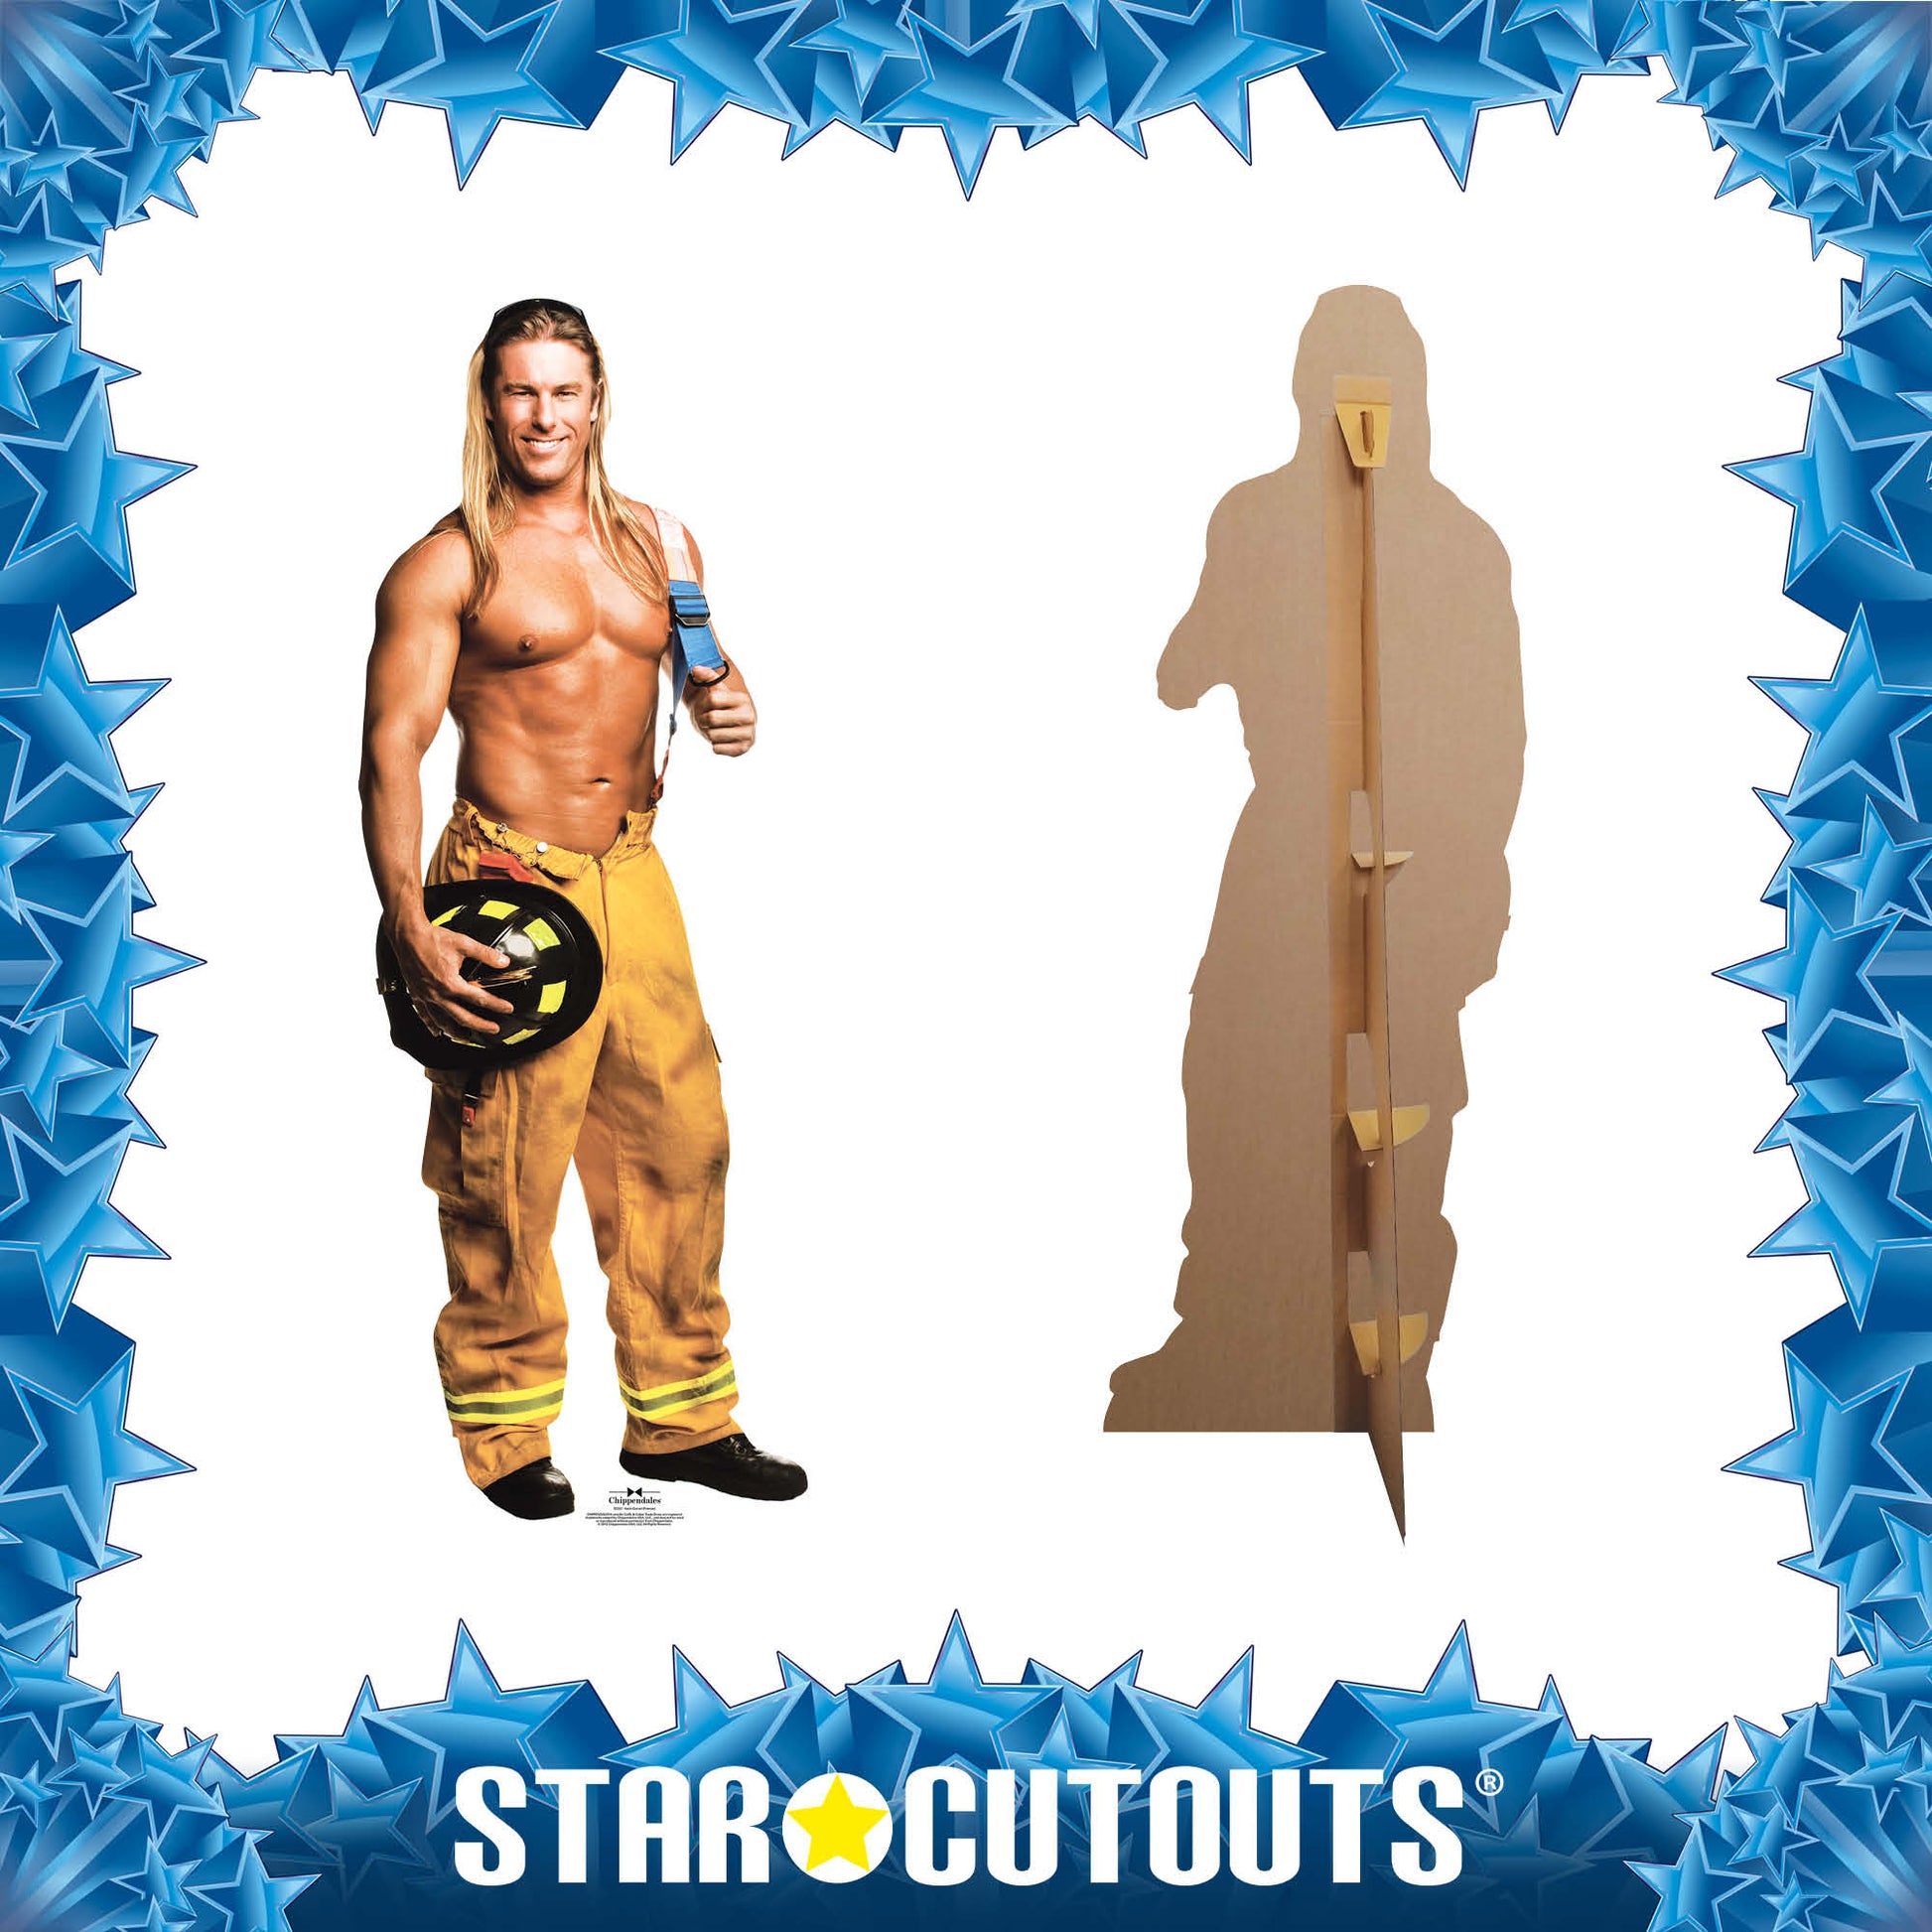 SC531 Kevin  Fireman  Chippendales Cardboard Cut Out Height 189cm - Star Cutouts